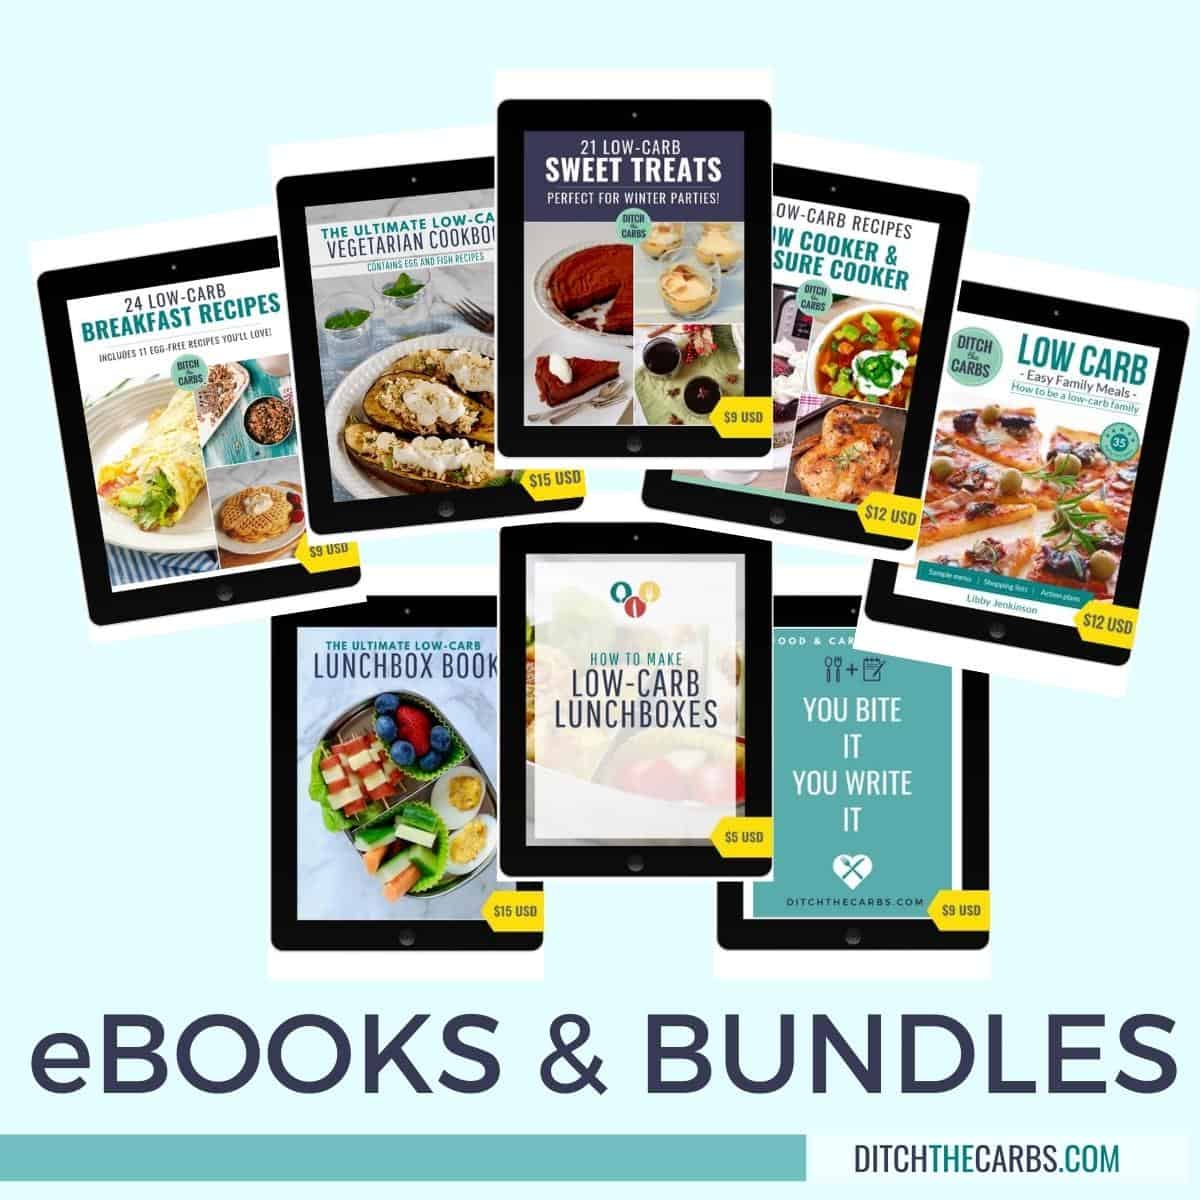 mockups of ebooks that affiliates can sell